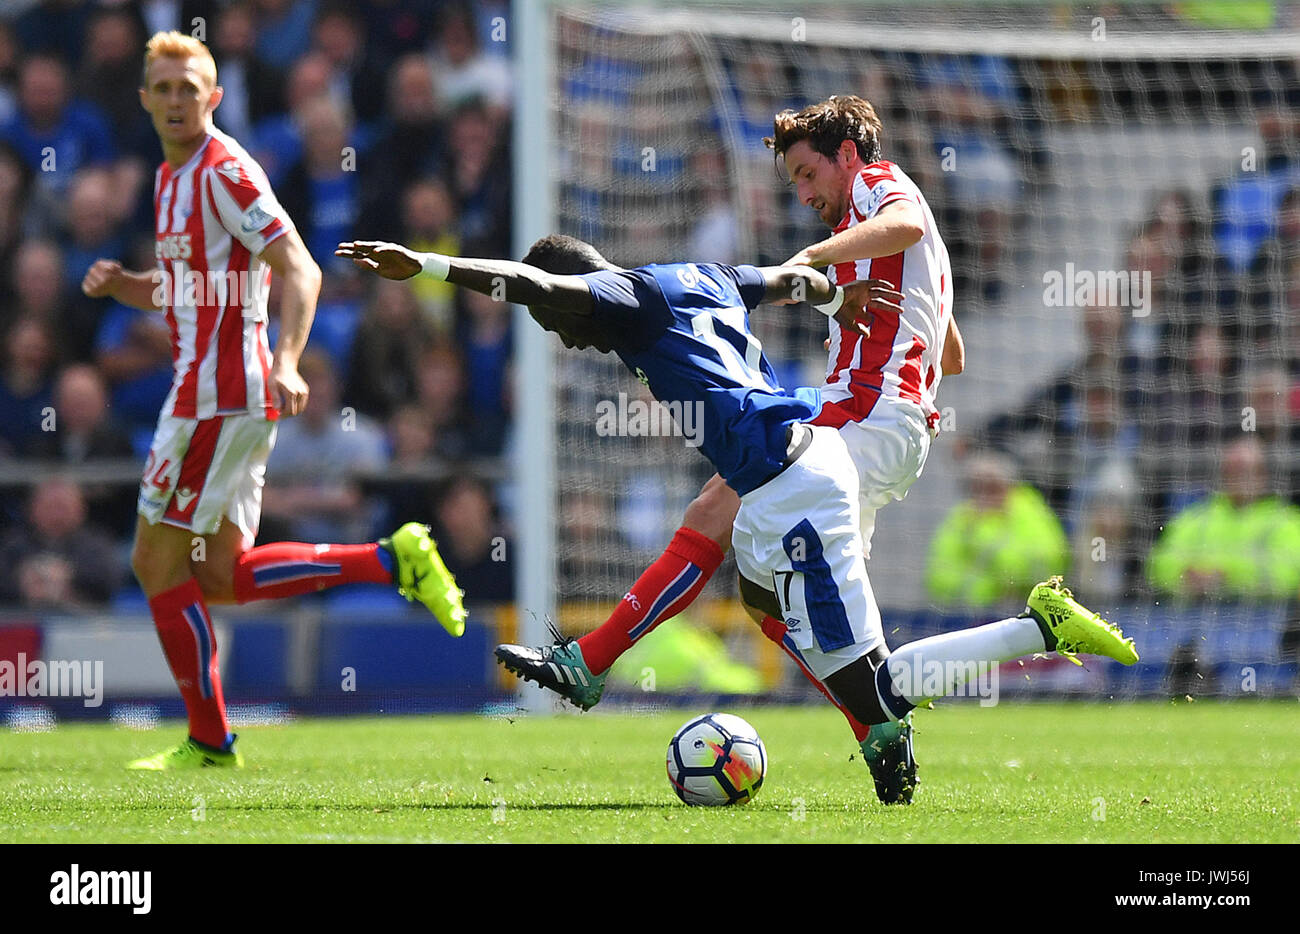 Everton's Idrissa Gueye and Stoke City's Joe Allen (right) battle for the ball during the Premier League match at Goodison Park, Liverpool. Stock Photo